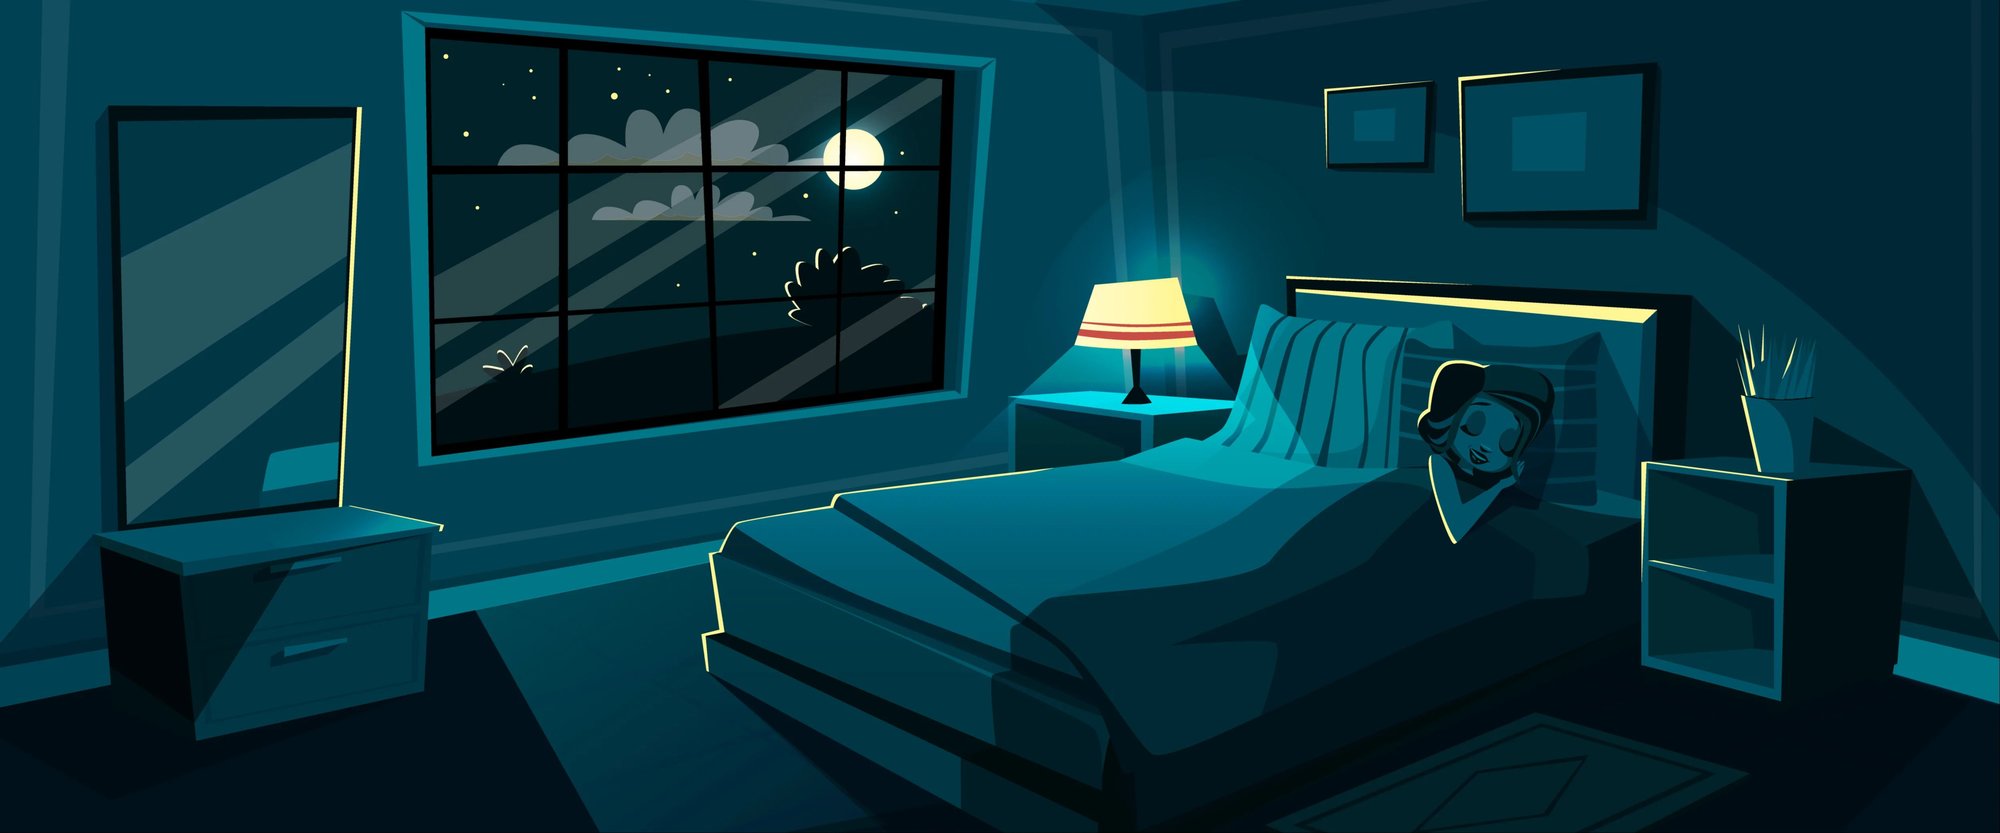 Illustration of a woman sleeping on a queen bed in bedroom